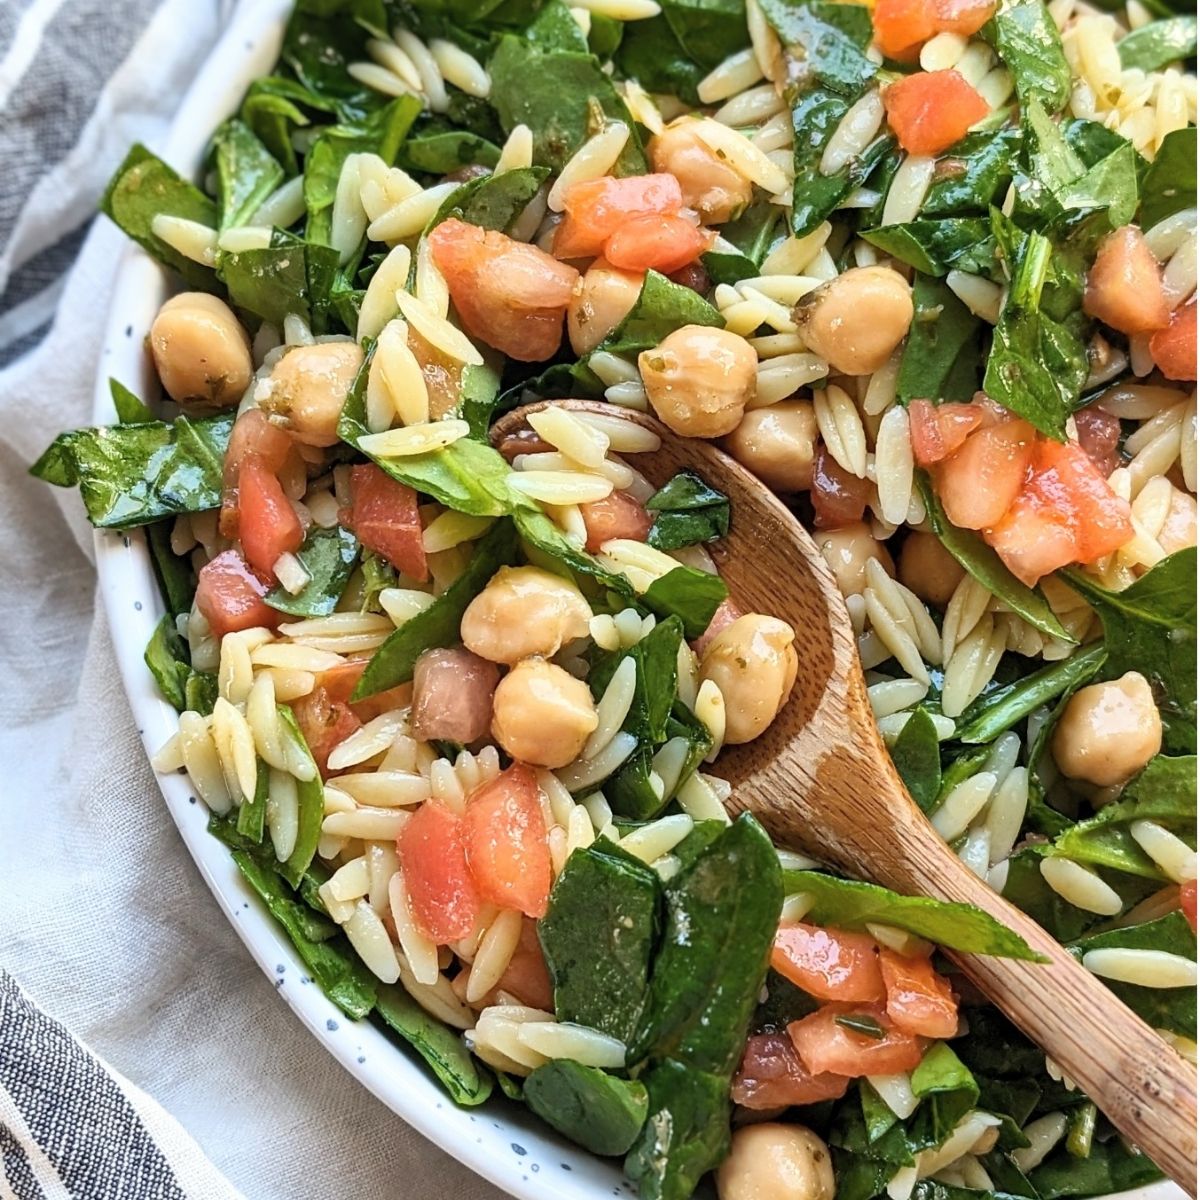 Easy and Cold Pasta Salad Recipes - Orzo & Spinach Pasta Salad